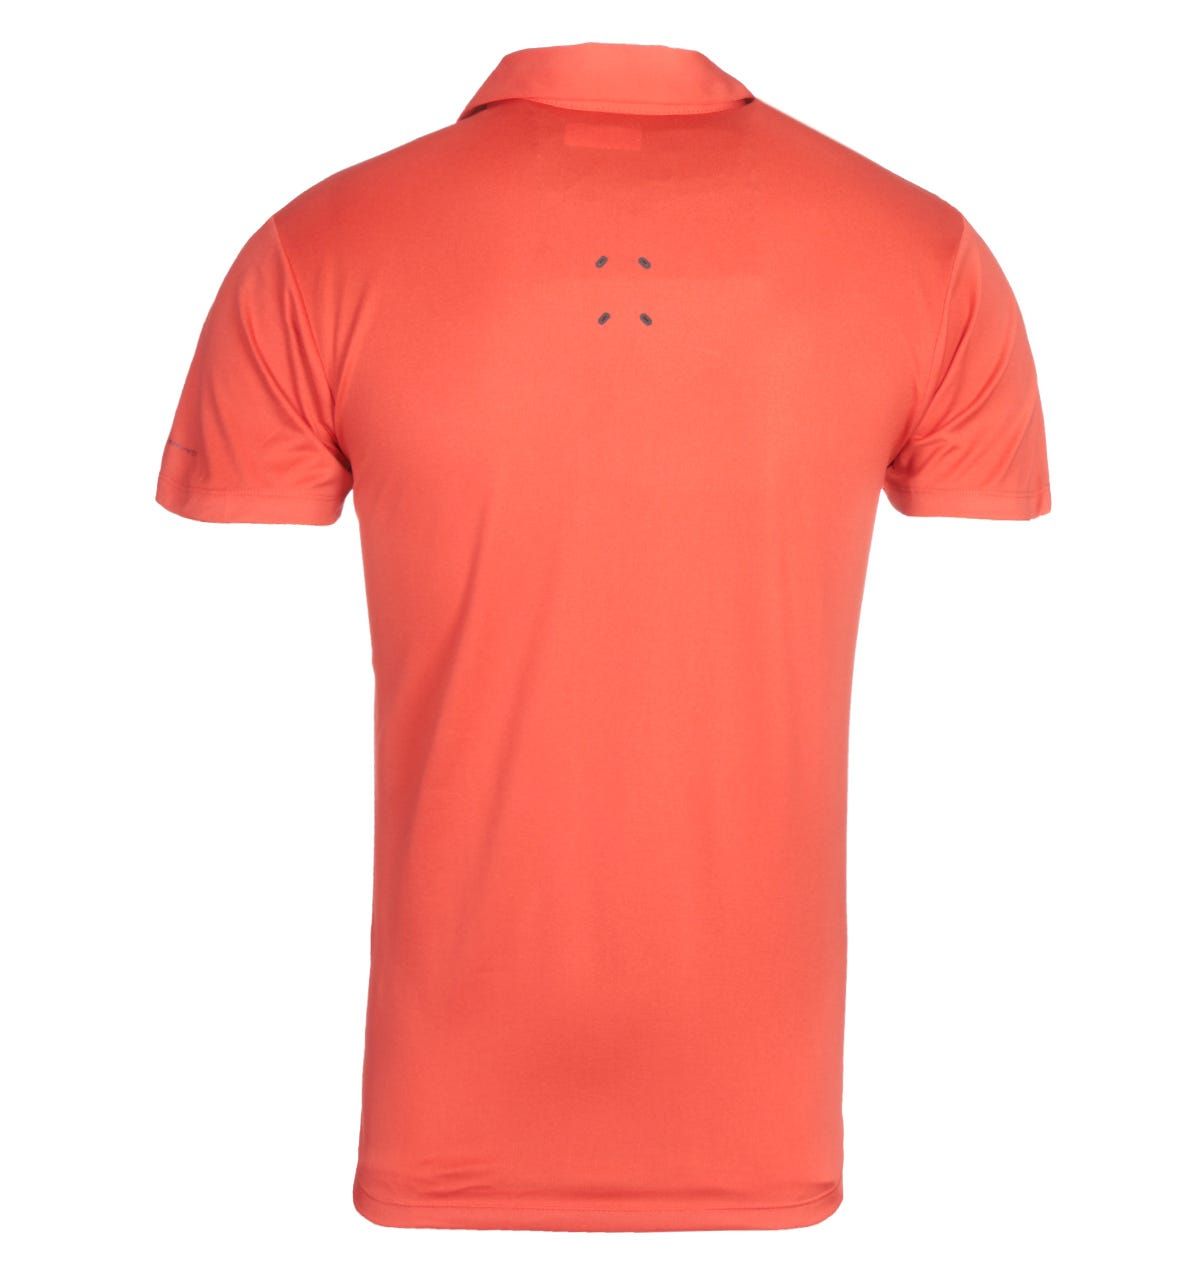 <p>A cool-season essential crafted by Columbia. The Columbia Triple Canyon Red Tech Polo Shirt is a stretch cotton composition fitted with a three-button placket and spread collar. The design is finished with the Columbia logo printed on to the chest.</p><ul><li>Stretch cotton composition</li><li>Three button placket</li><li>Short sleeve</li><li>Spread collar</li><li>Tonal stitching throughout</li><li>Columbia logo printed on the chest</li></ul><p>Style & Fit:</p><ul><li>Regular fit</li><li>Fits true to size</li></ul><p>Fabric Composition & Care:</p><ul><li>100% Stretch cotton</li><li>Machine wash</li></ul>